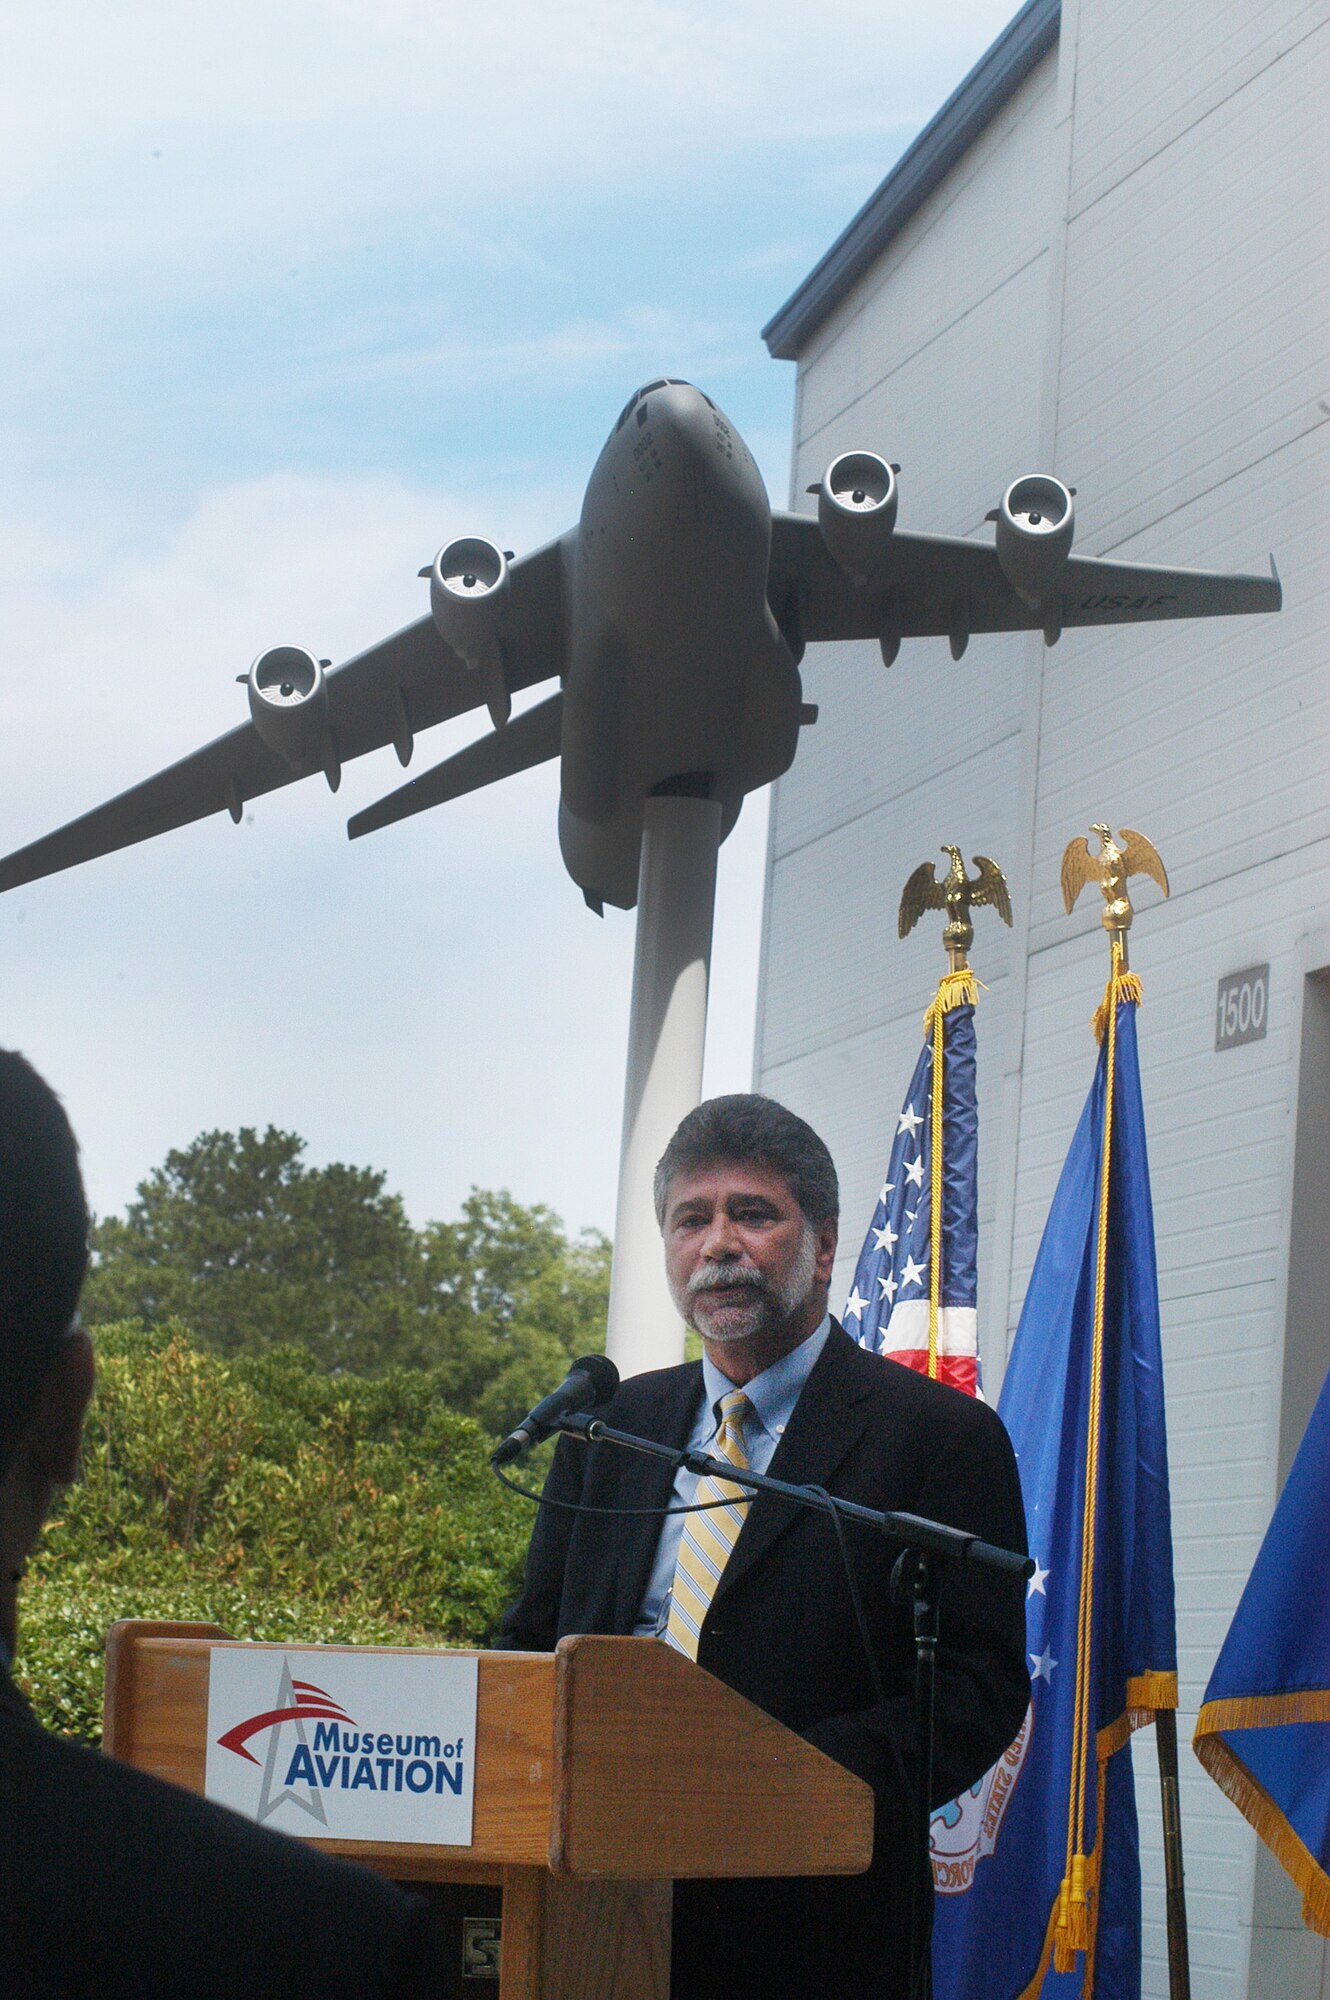 Gus Urzua, Boeing vice president and program manager of C-17 Globemaster III Sustainment Partnership, speaks at the Boeing C-17 model dedication at the Museum of Aviation June 24. The Boeing Company donated a large model of the C-17 Globemaster III airlifter to the Museum of Aviation for an outdoor display near the Museum’s Eagle Building South Entrance. The 402d Maintenance Wing at Robins Air Force Base provides depot maintenance, engineering support and software development for the C-17 aircraft. U. S. Air Force photo by Sue Sapp